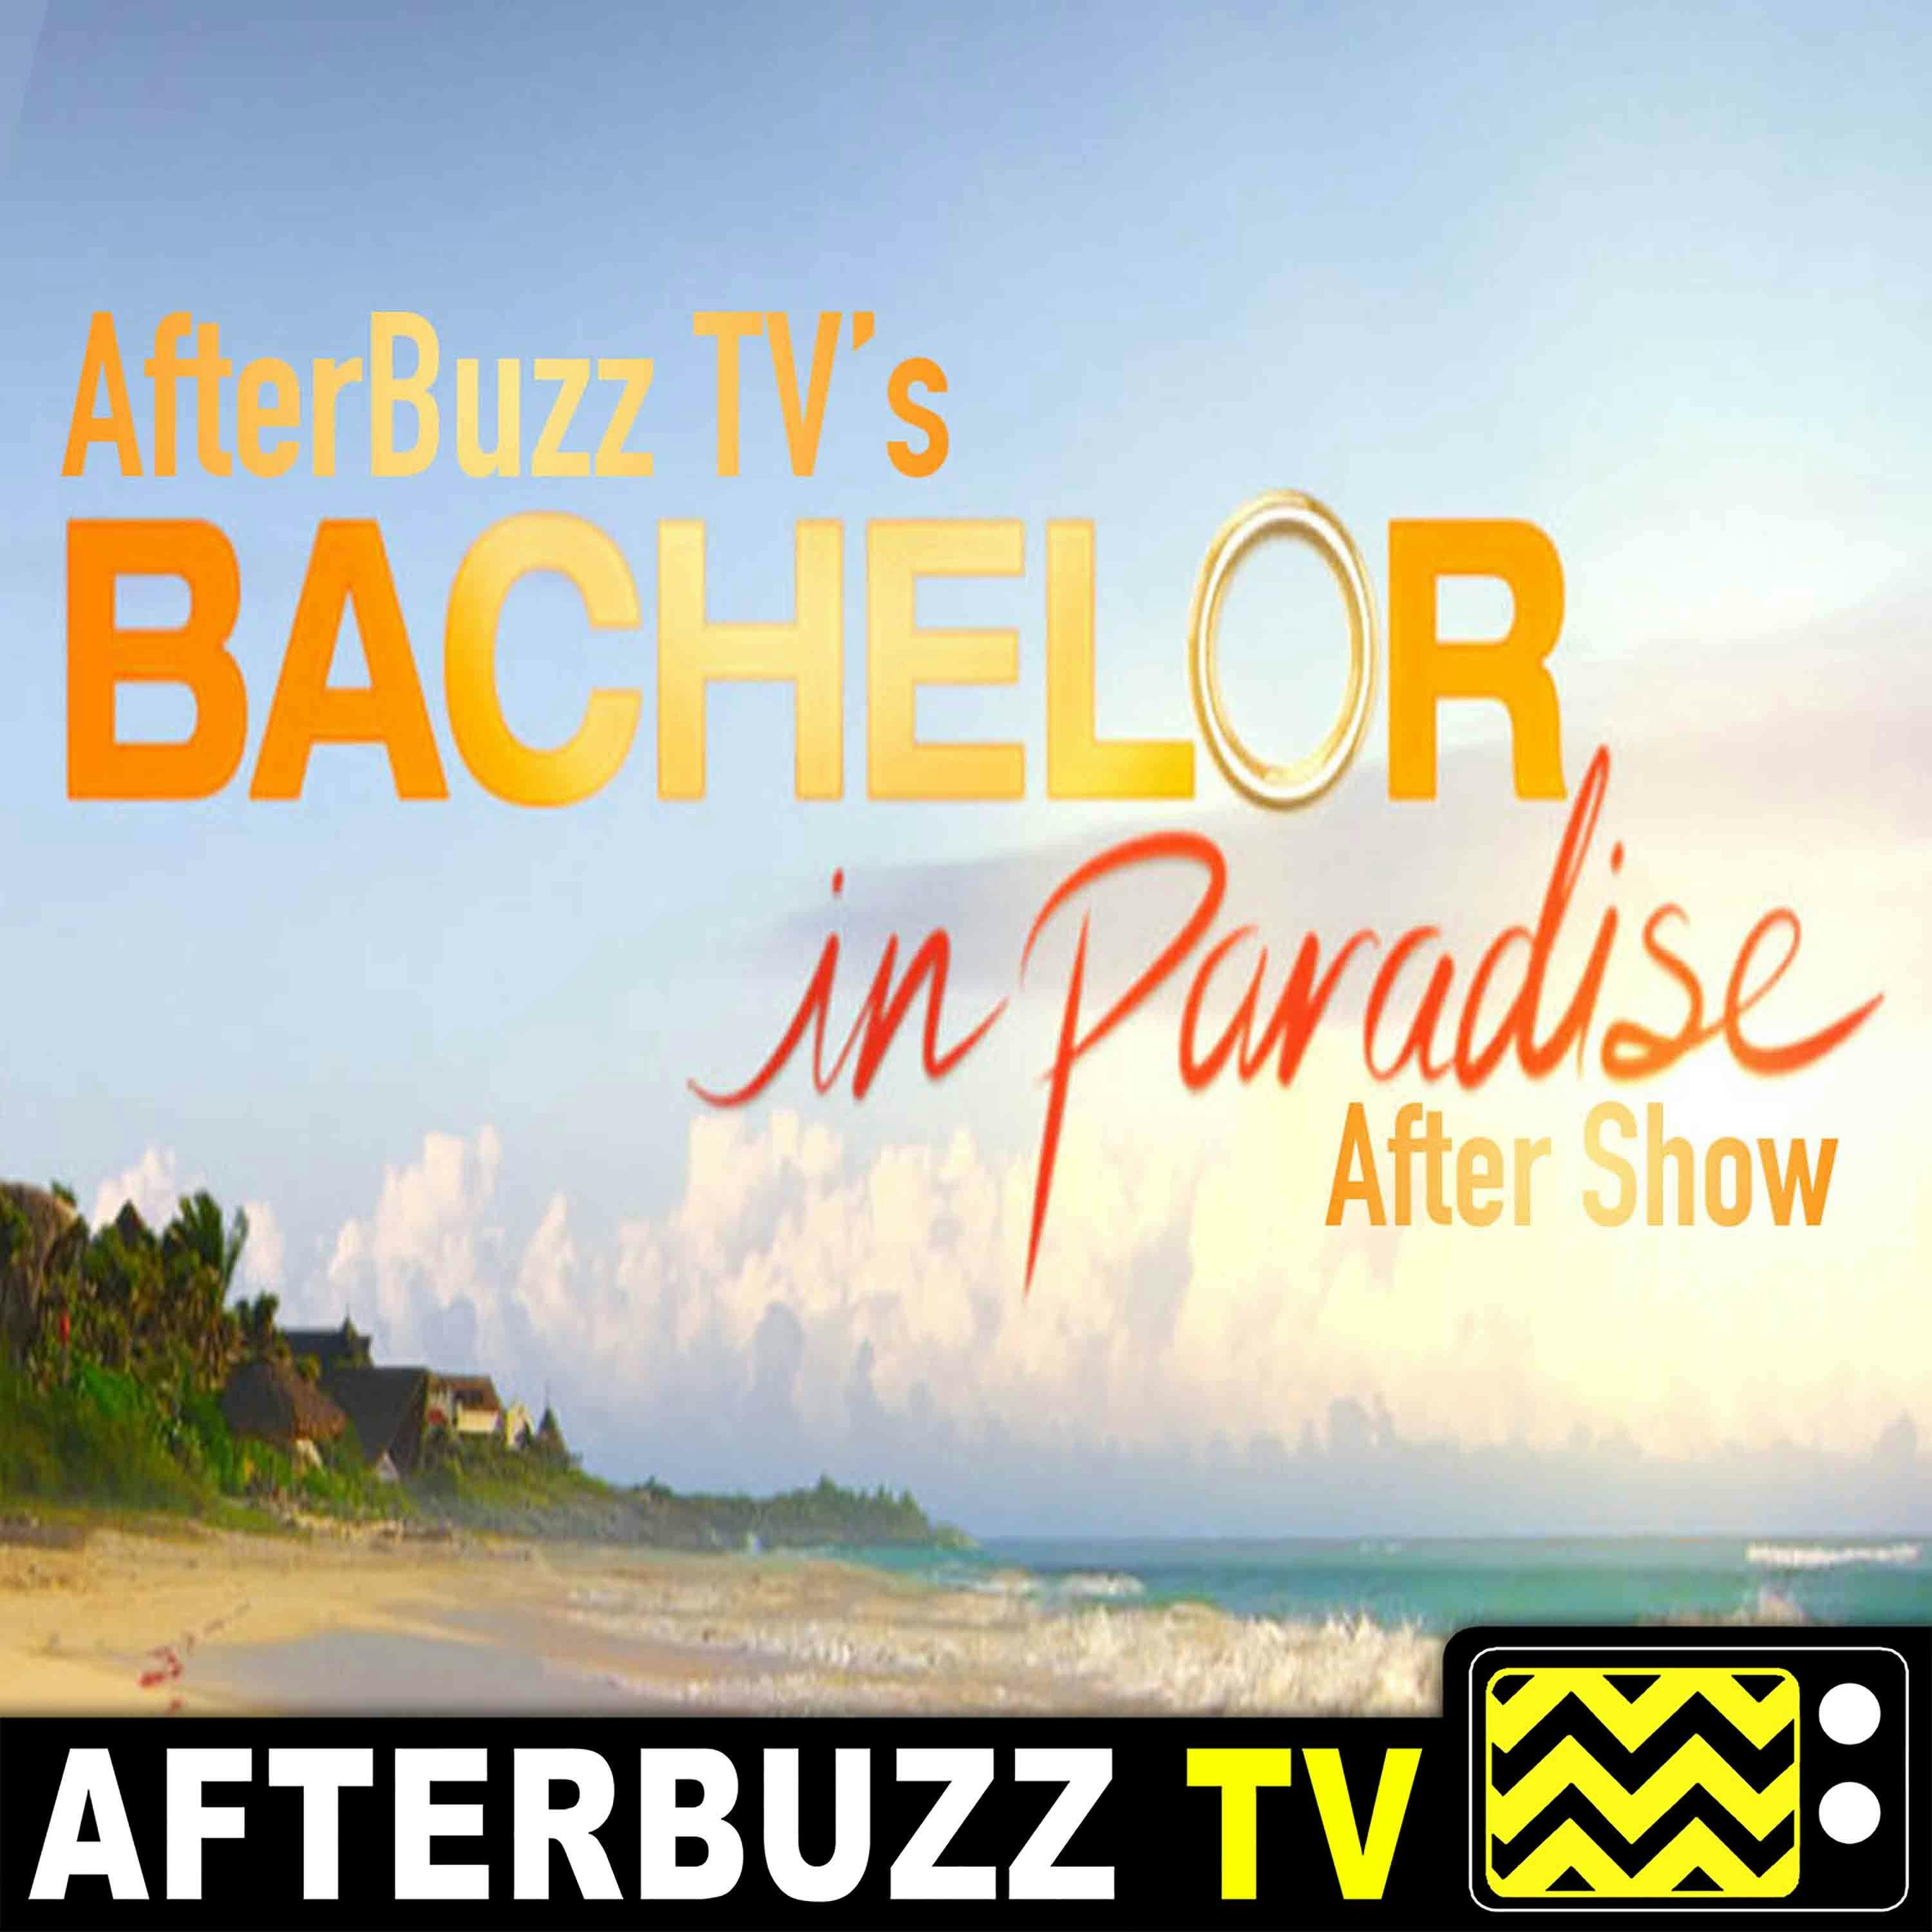 Bachelor In Paradise S:3 | Ashley Iaconetti Guests on Episodes 5 & 6 | AfterBuzz TV AfterShow